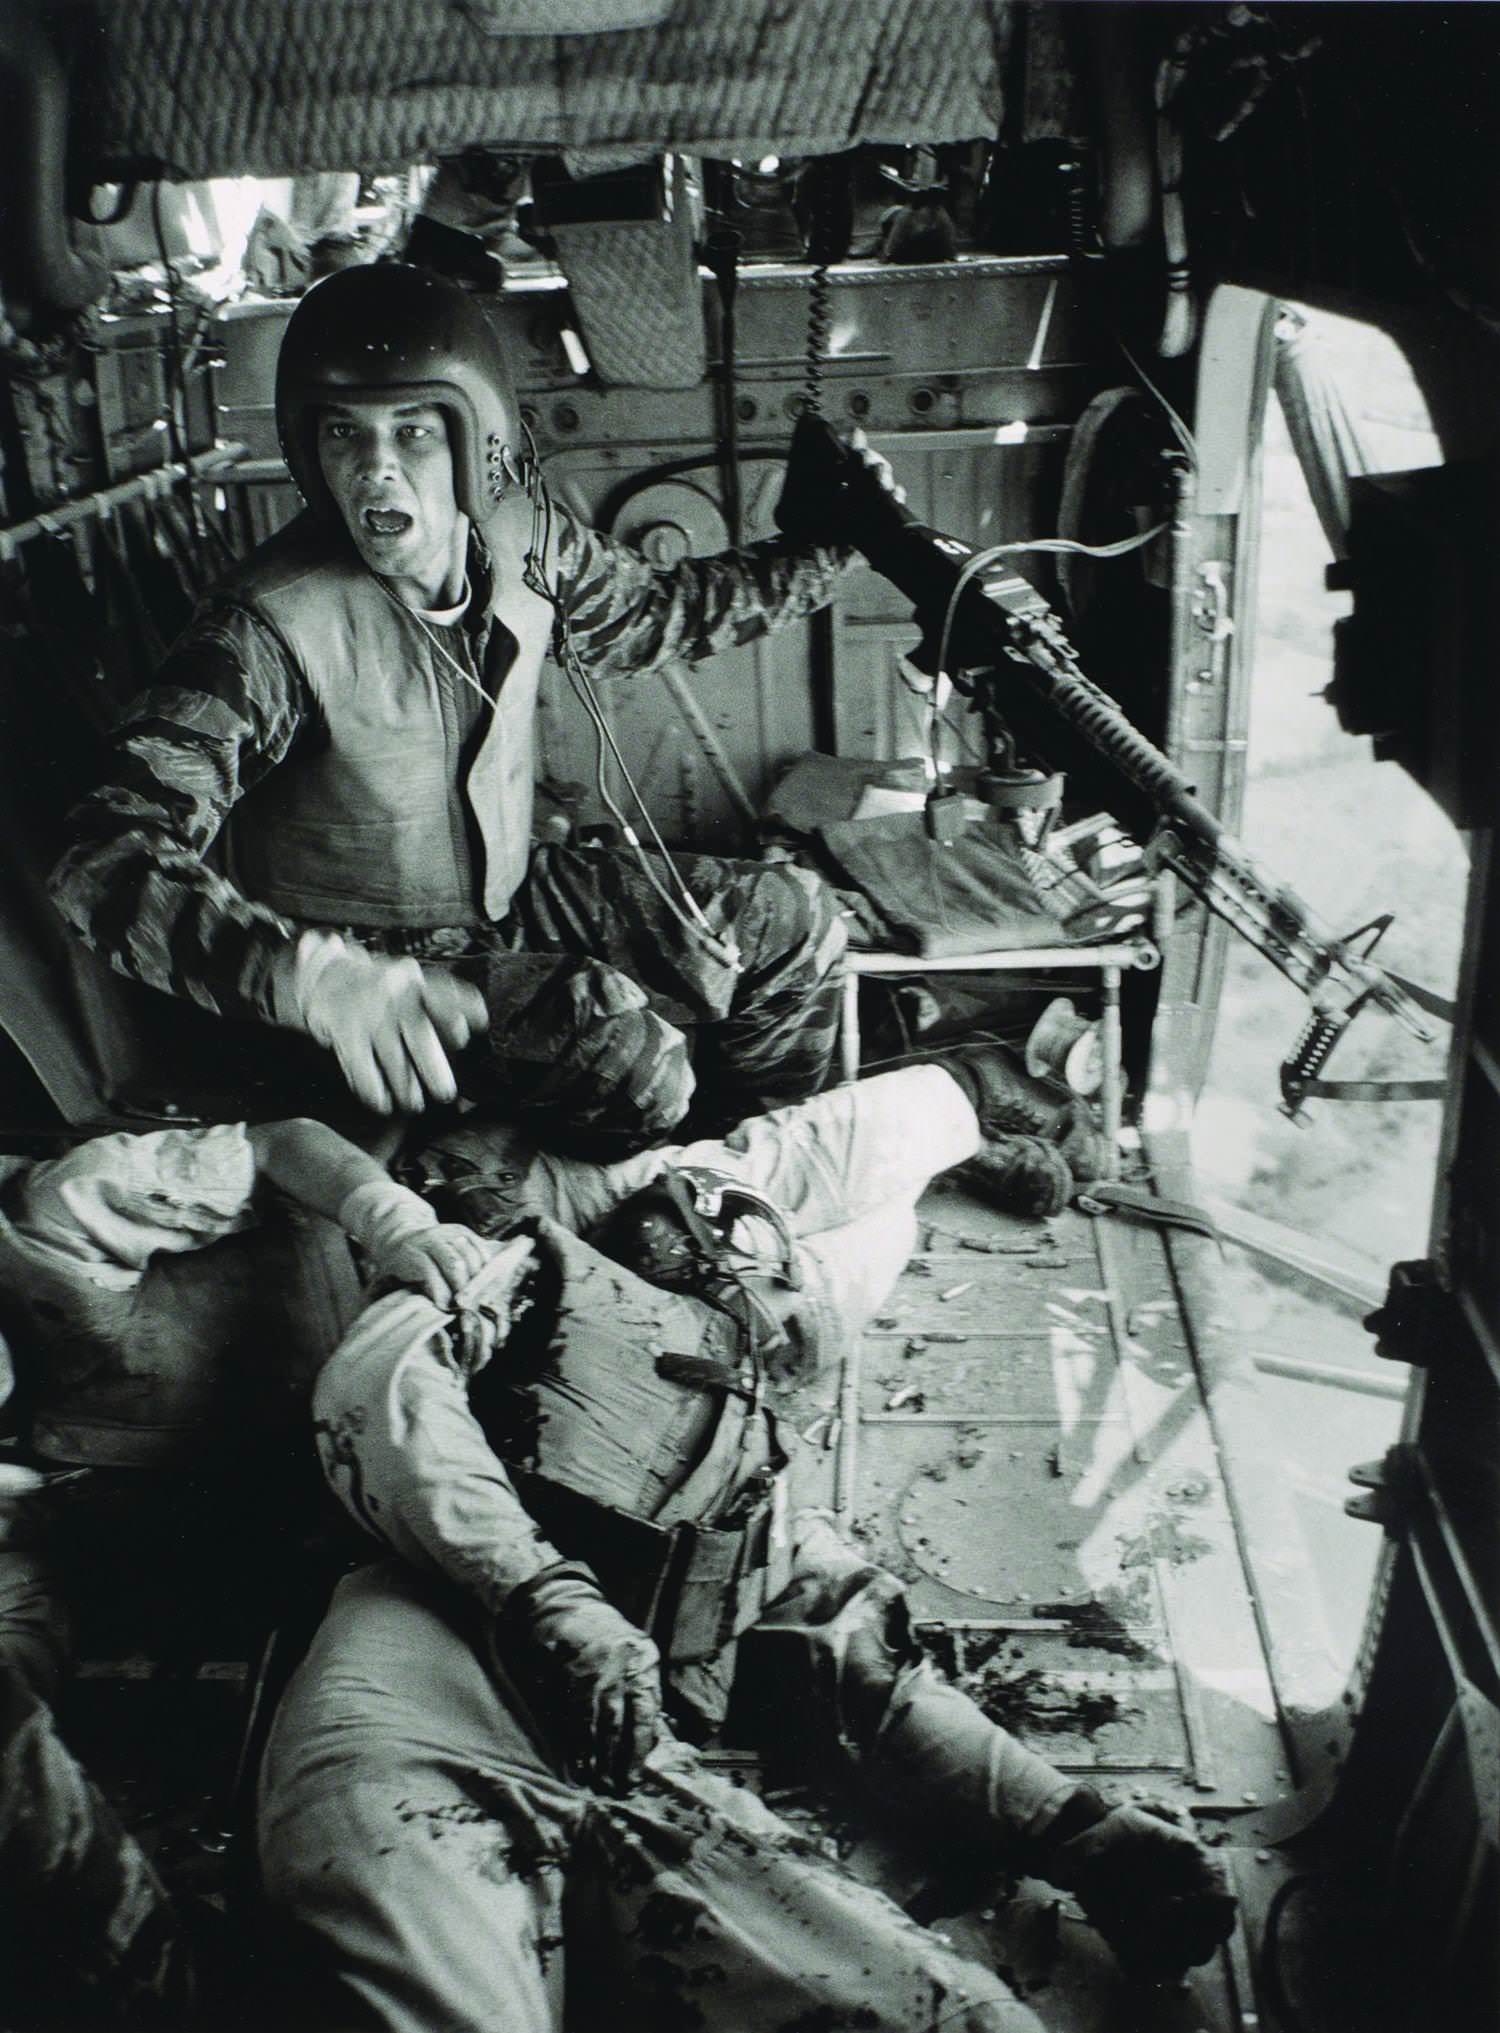 Crew Chief James Farley reacting when they cleared a hostile zone after 2 of his men have been shot during a mission in Vietnam in 1965. The one on the right, co-pilot Lieutenant Magel, sadly died before arriving back at base.